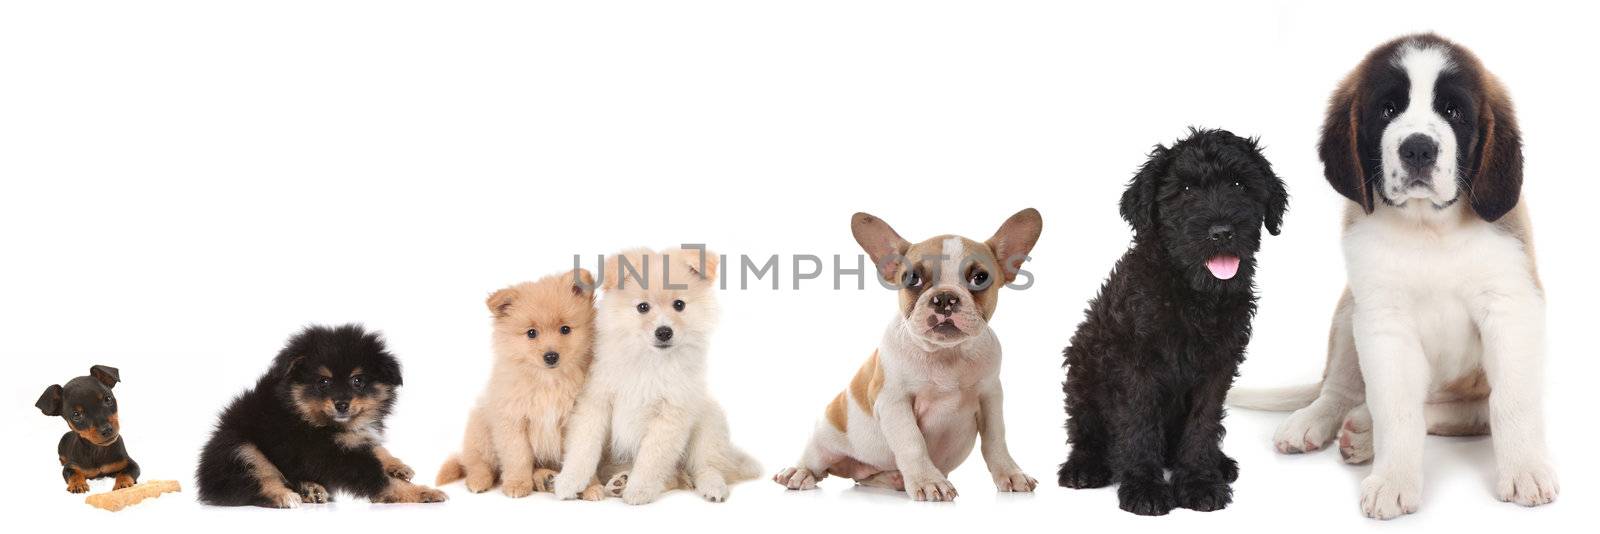 Different Breeds of Puppy Dogs on White by tobkatrina